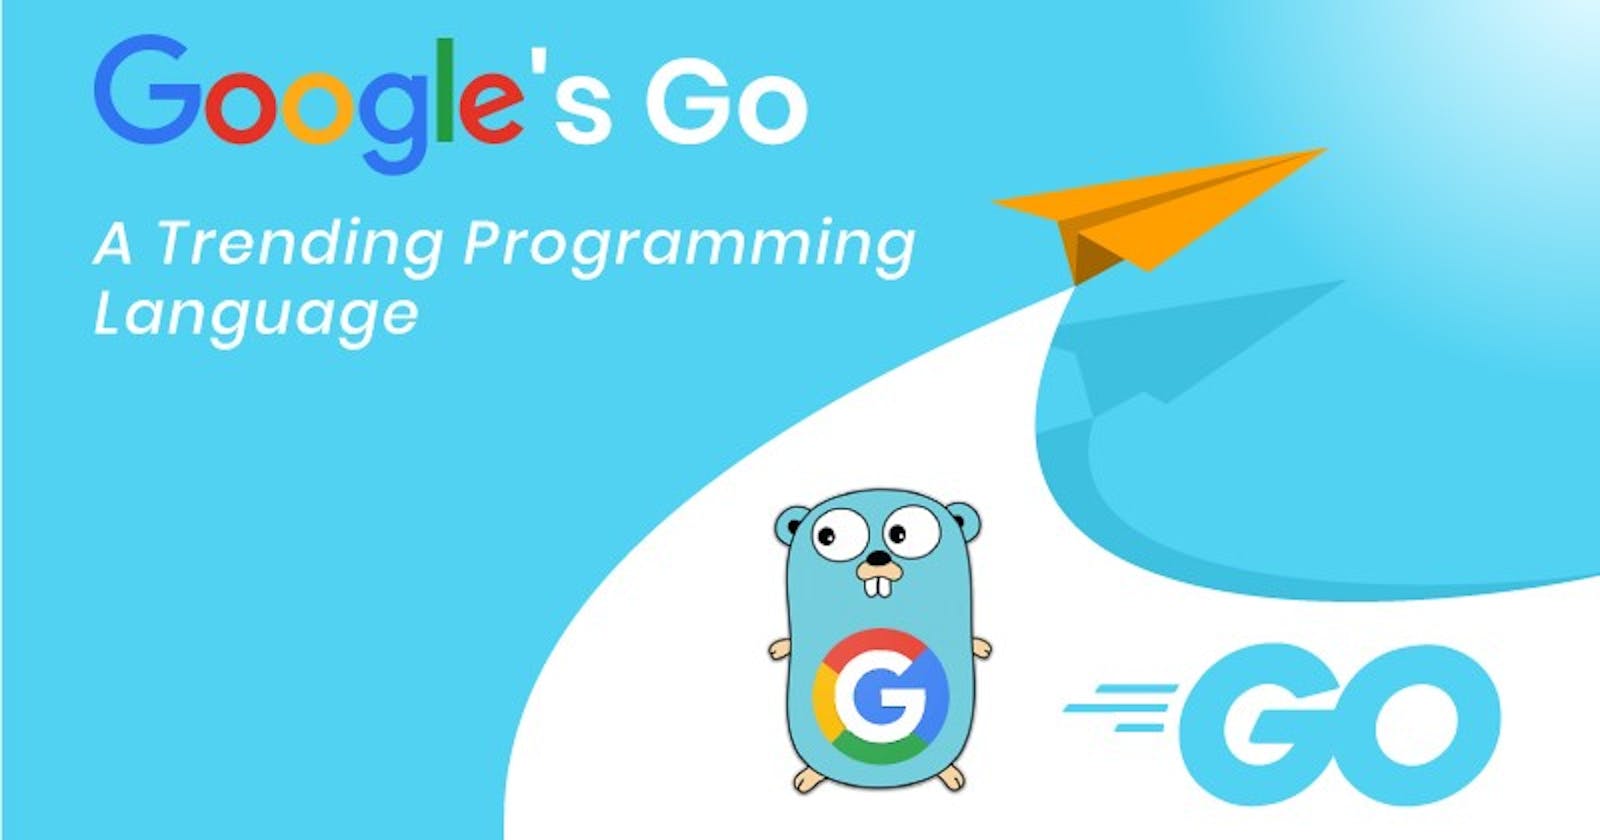 All That You Need to Know About “Google Go” Programming Language